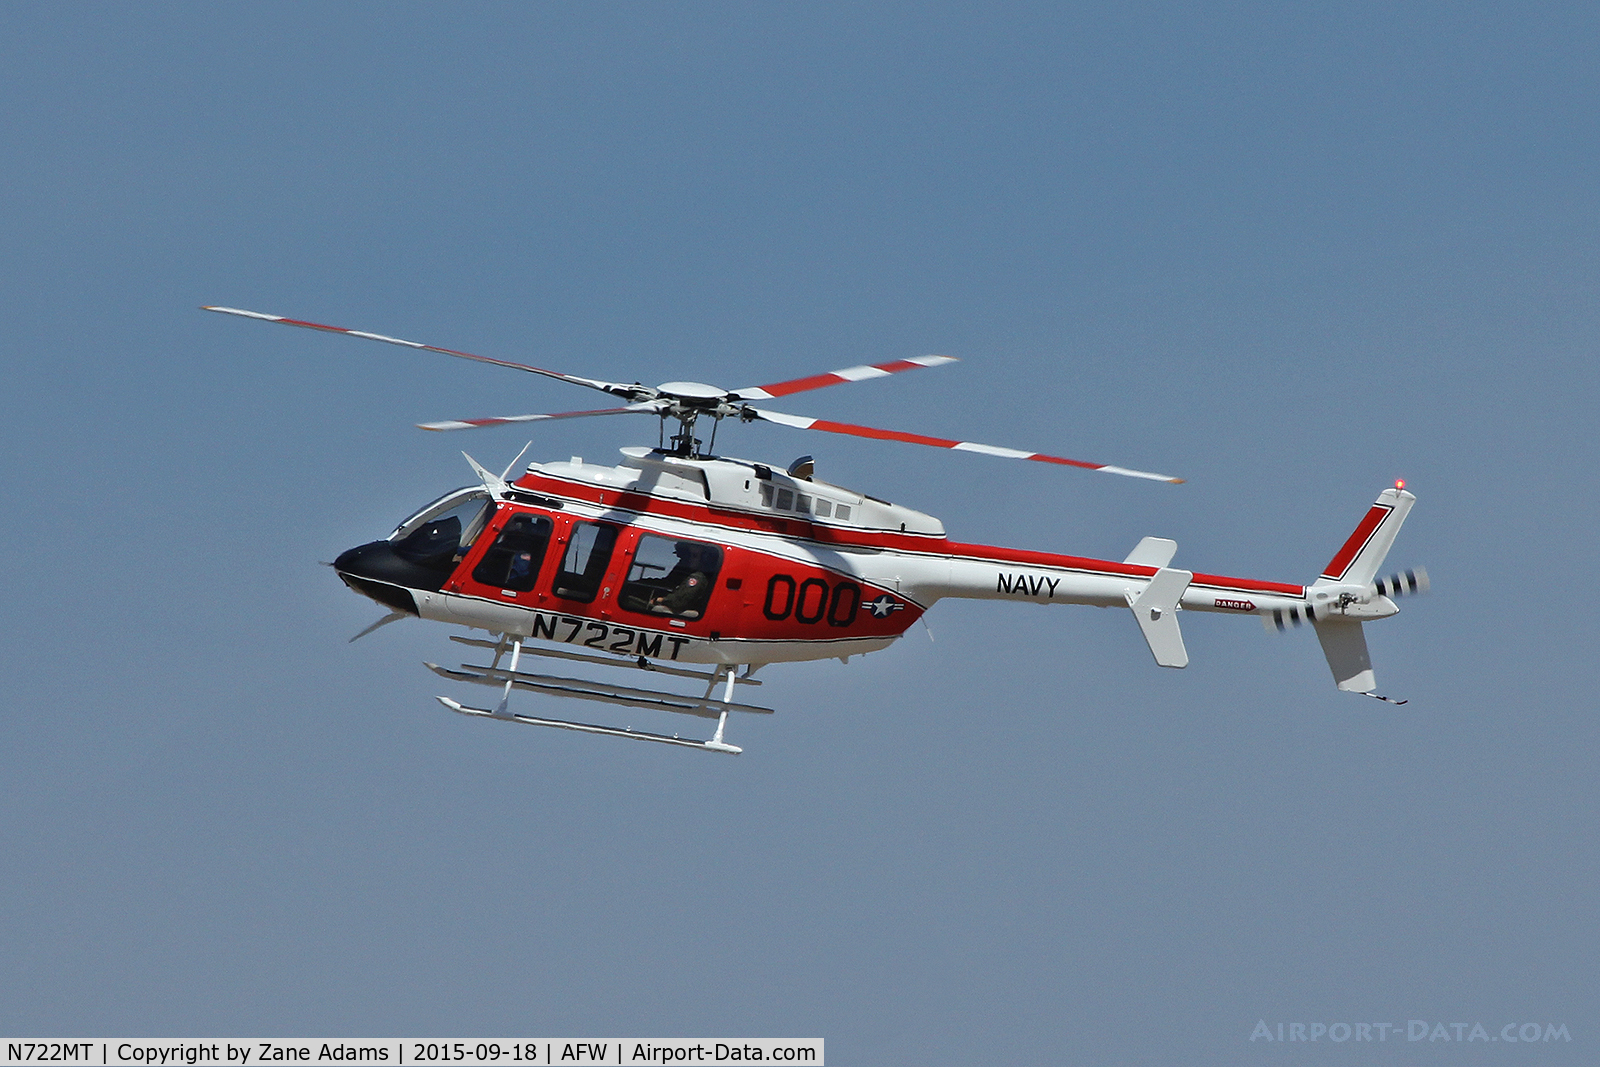 N722MT, 2014 Bell 407 C/N 54511, At Alliance Airport - Fort Worth,TX